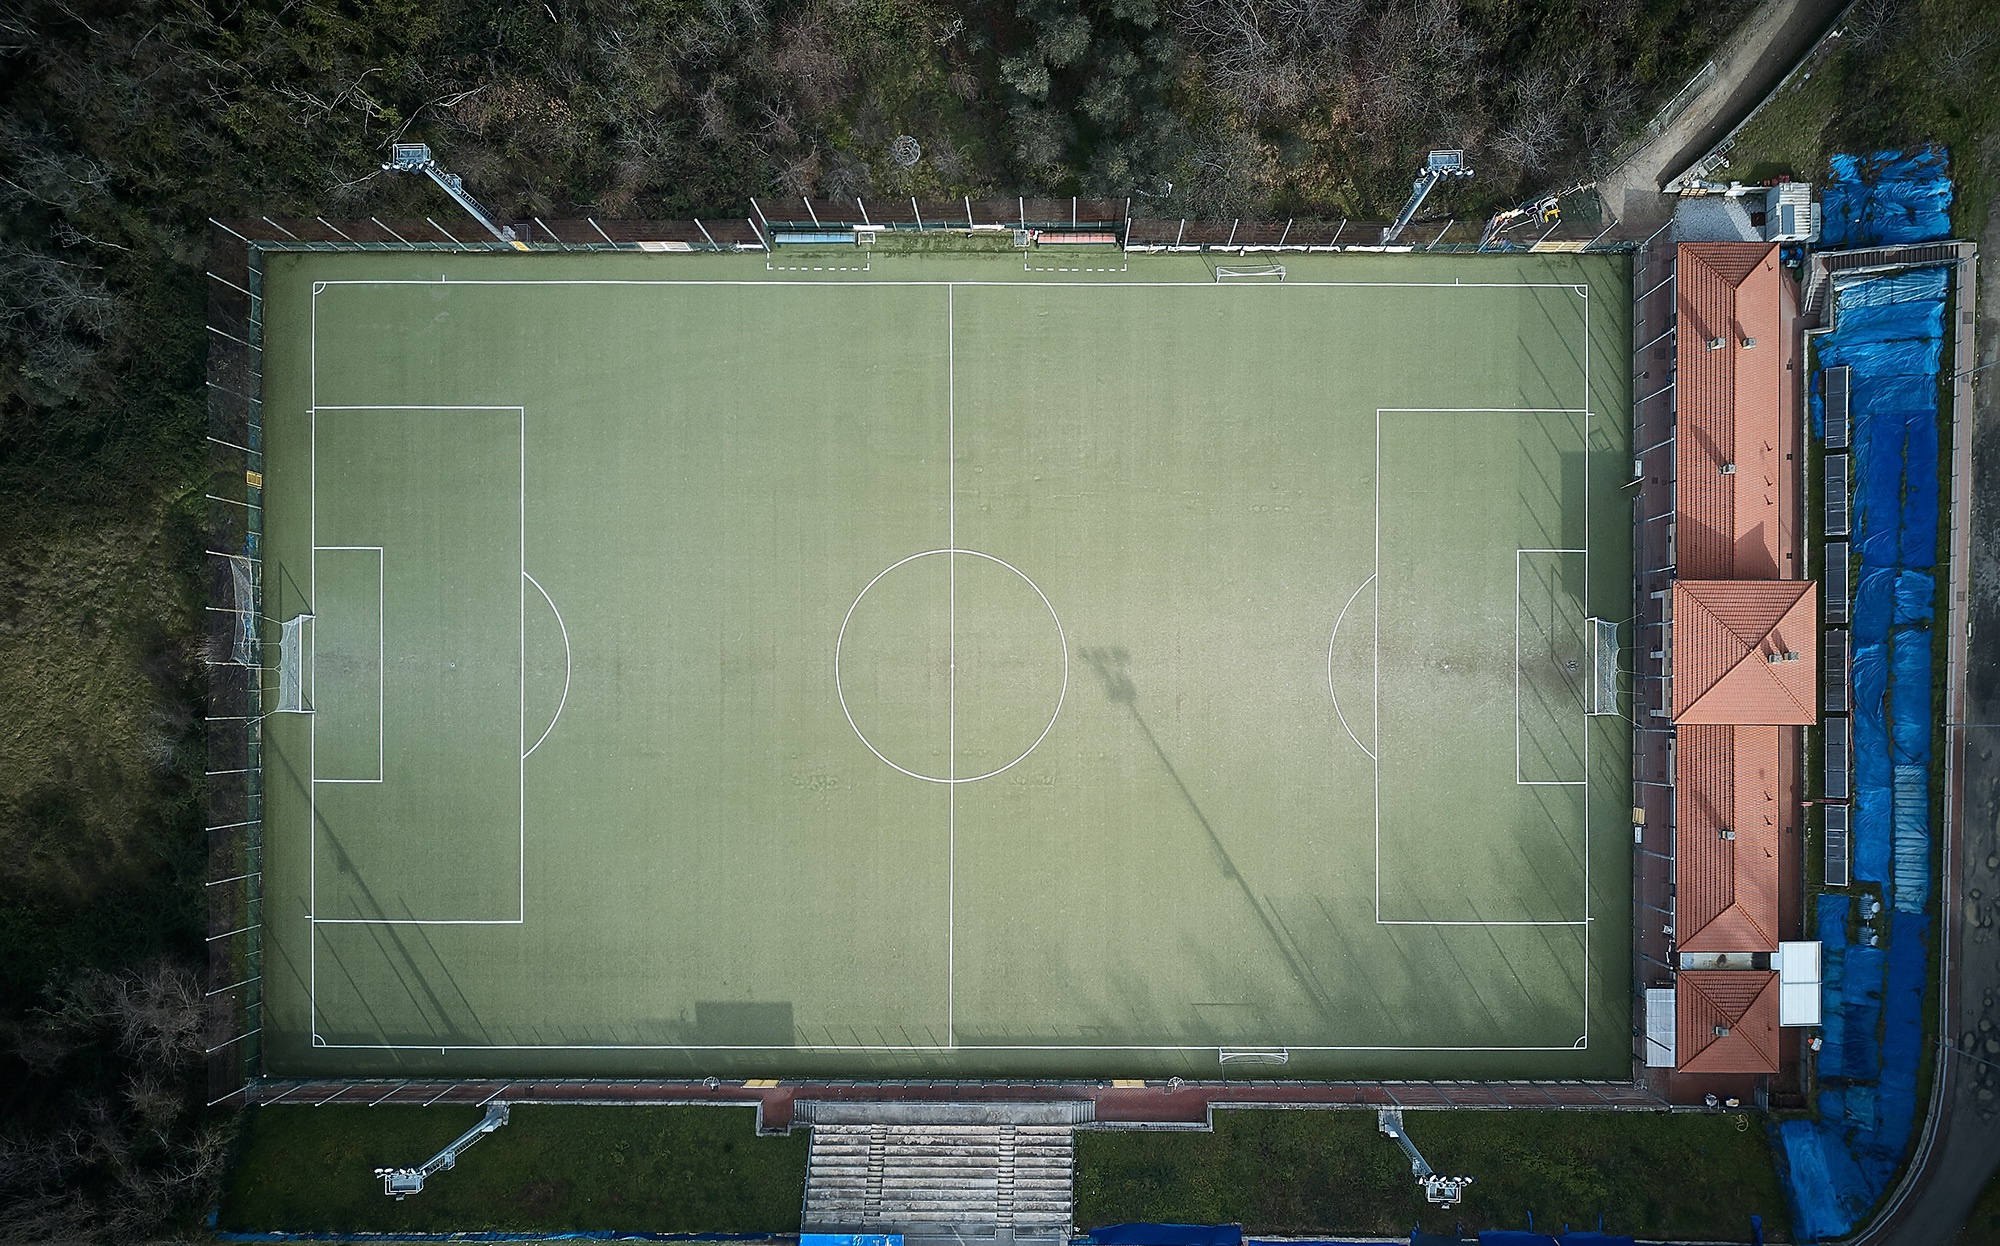 Soccer Field Aerial View Soccer Sports 2000x1246